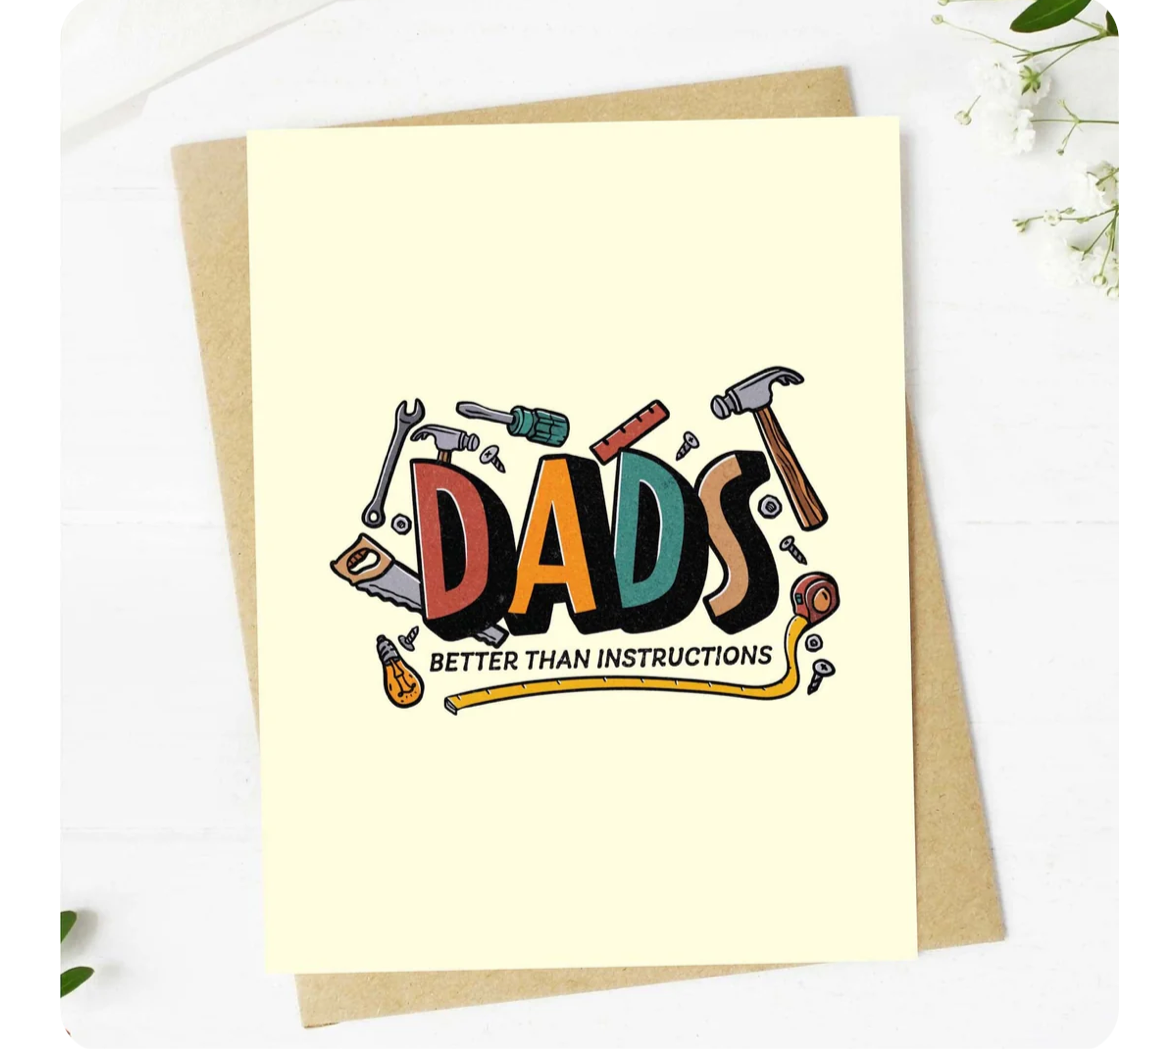 “Dads: Better Than Instructions” Getting Card